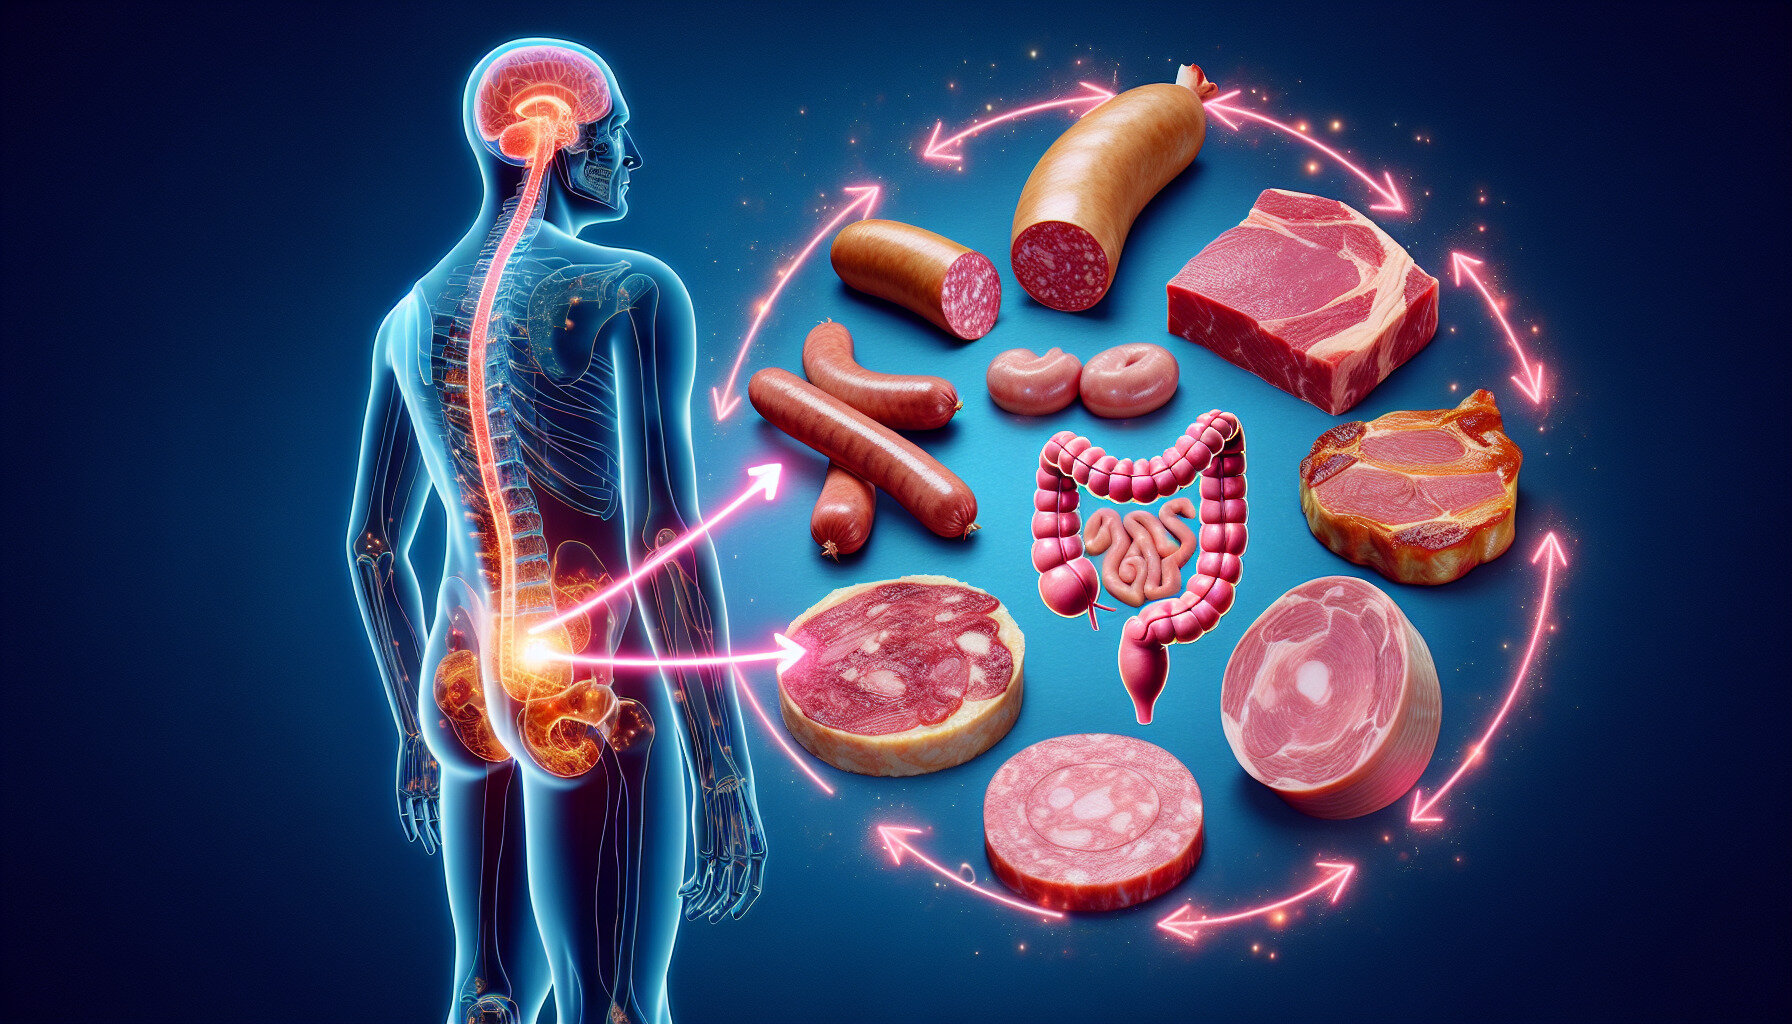 Processed meat and cancer: What you need to know